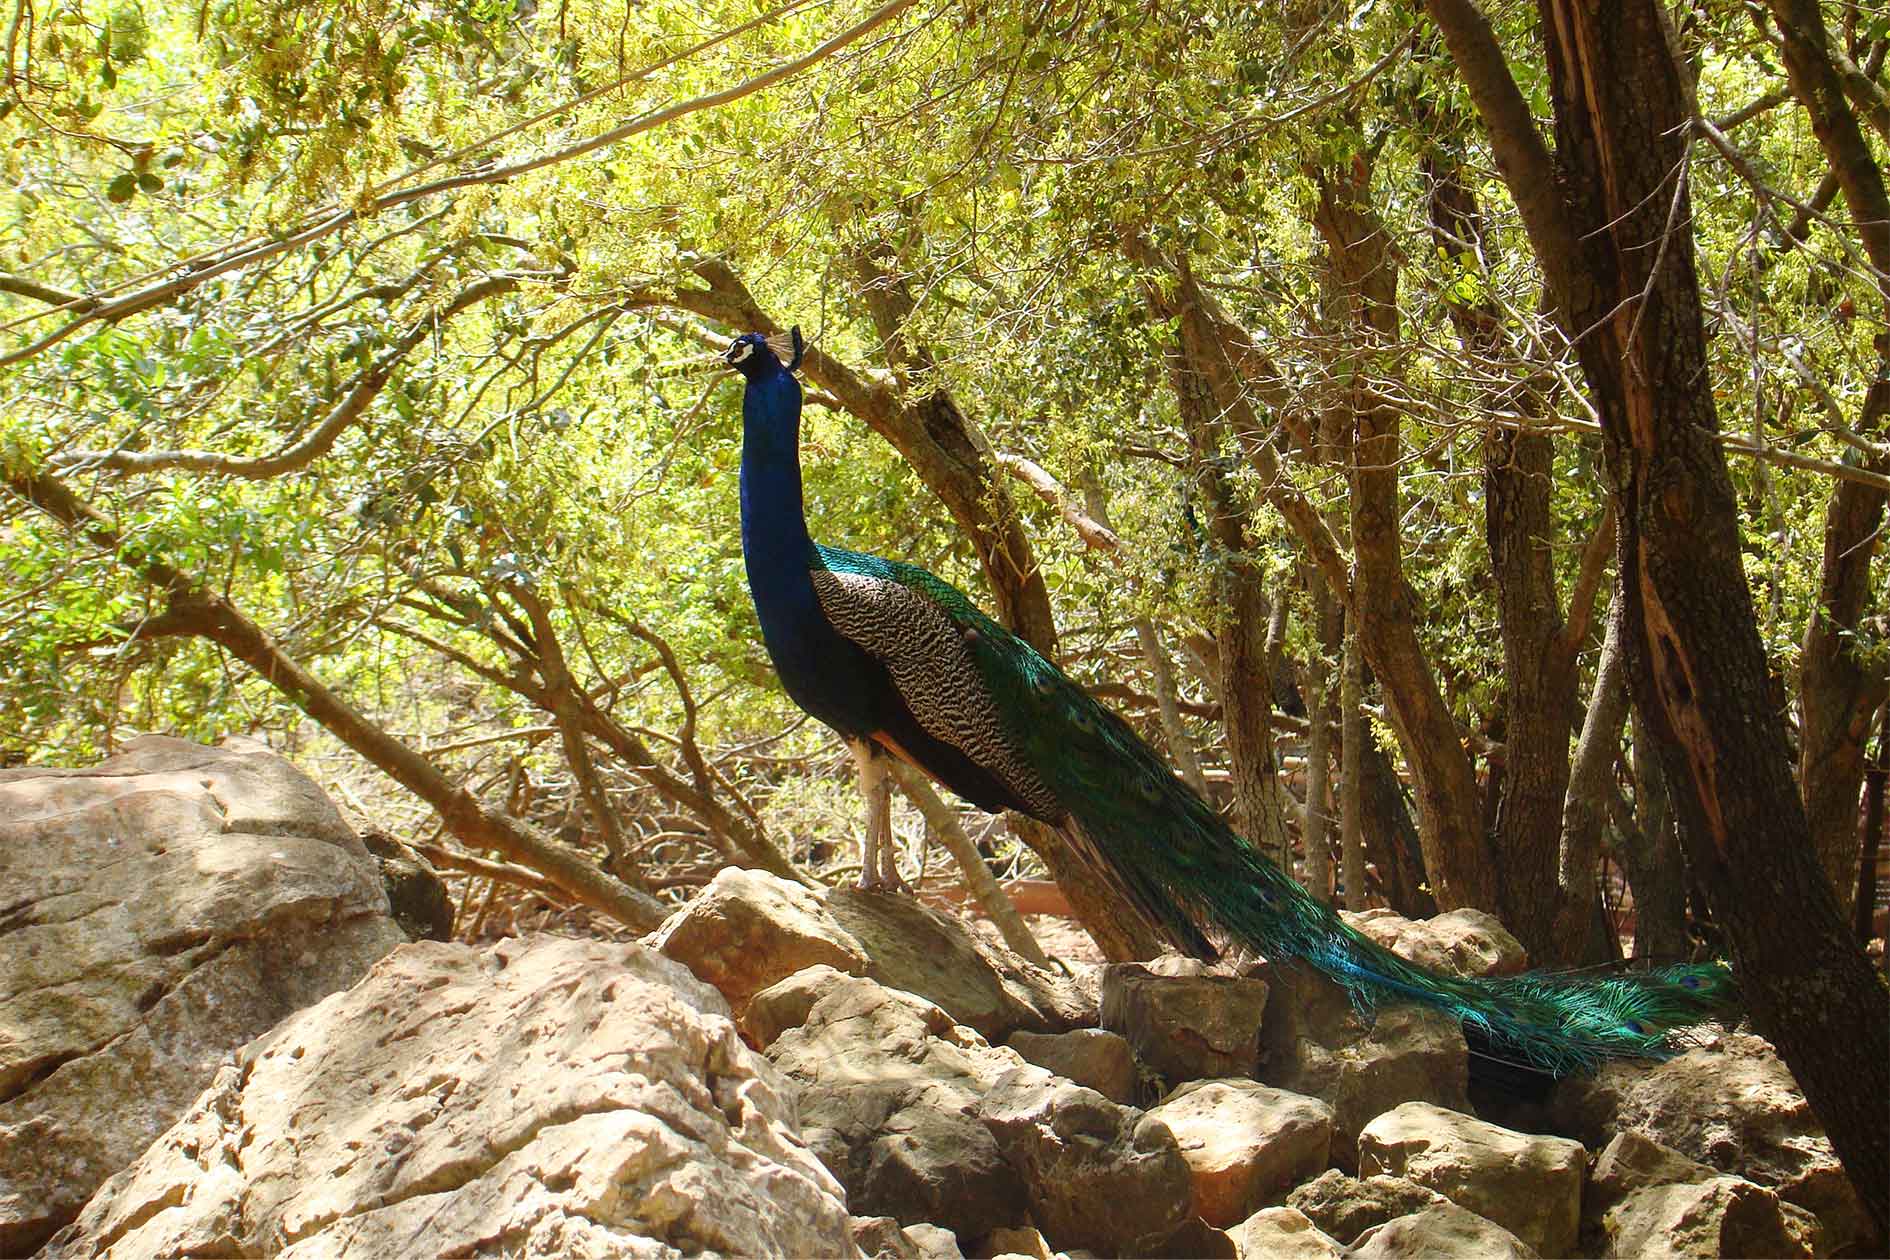 Peacock in Monkey forest